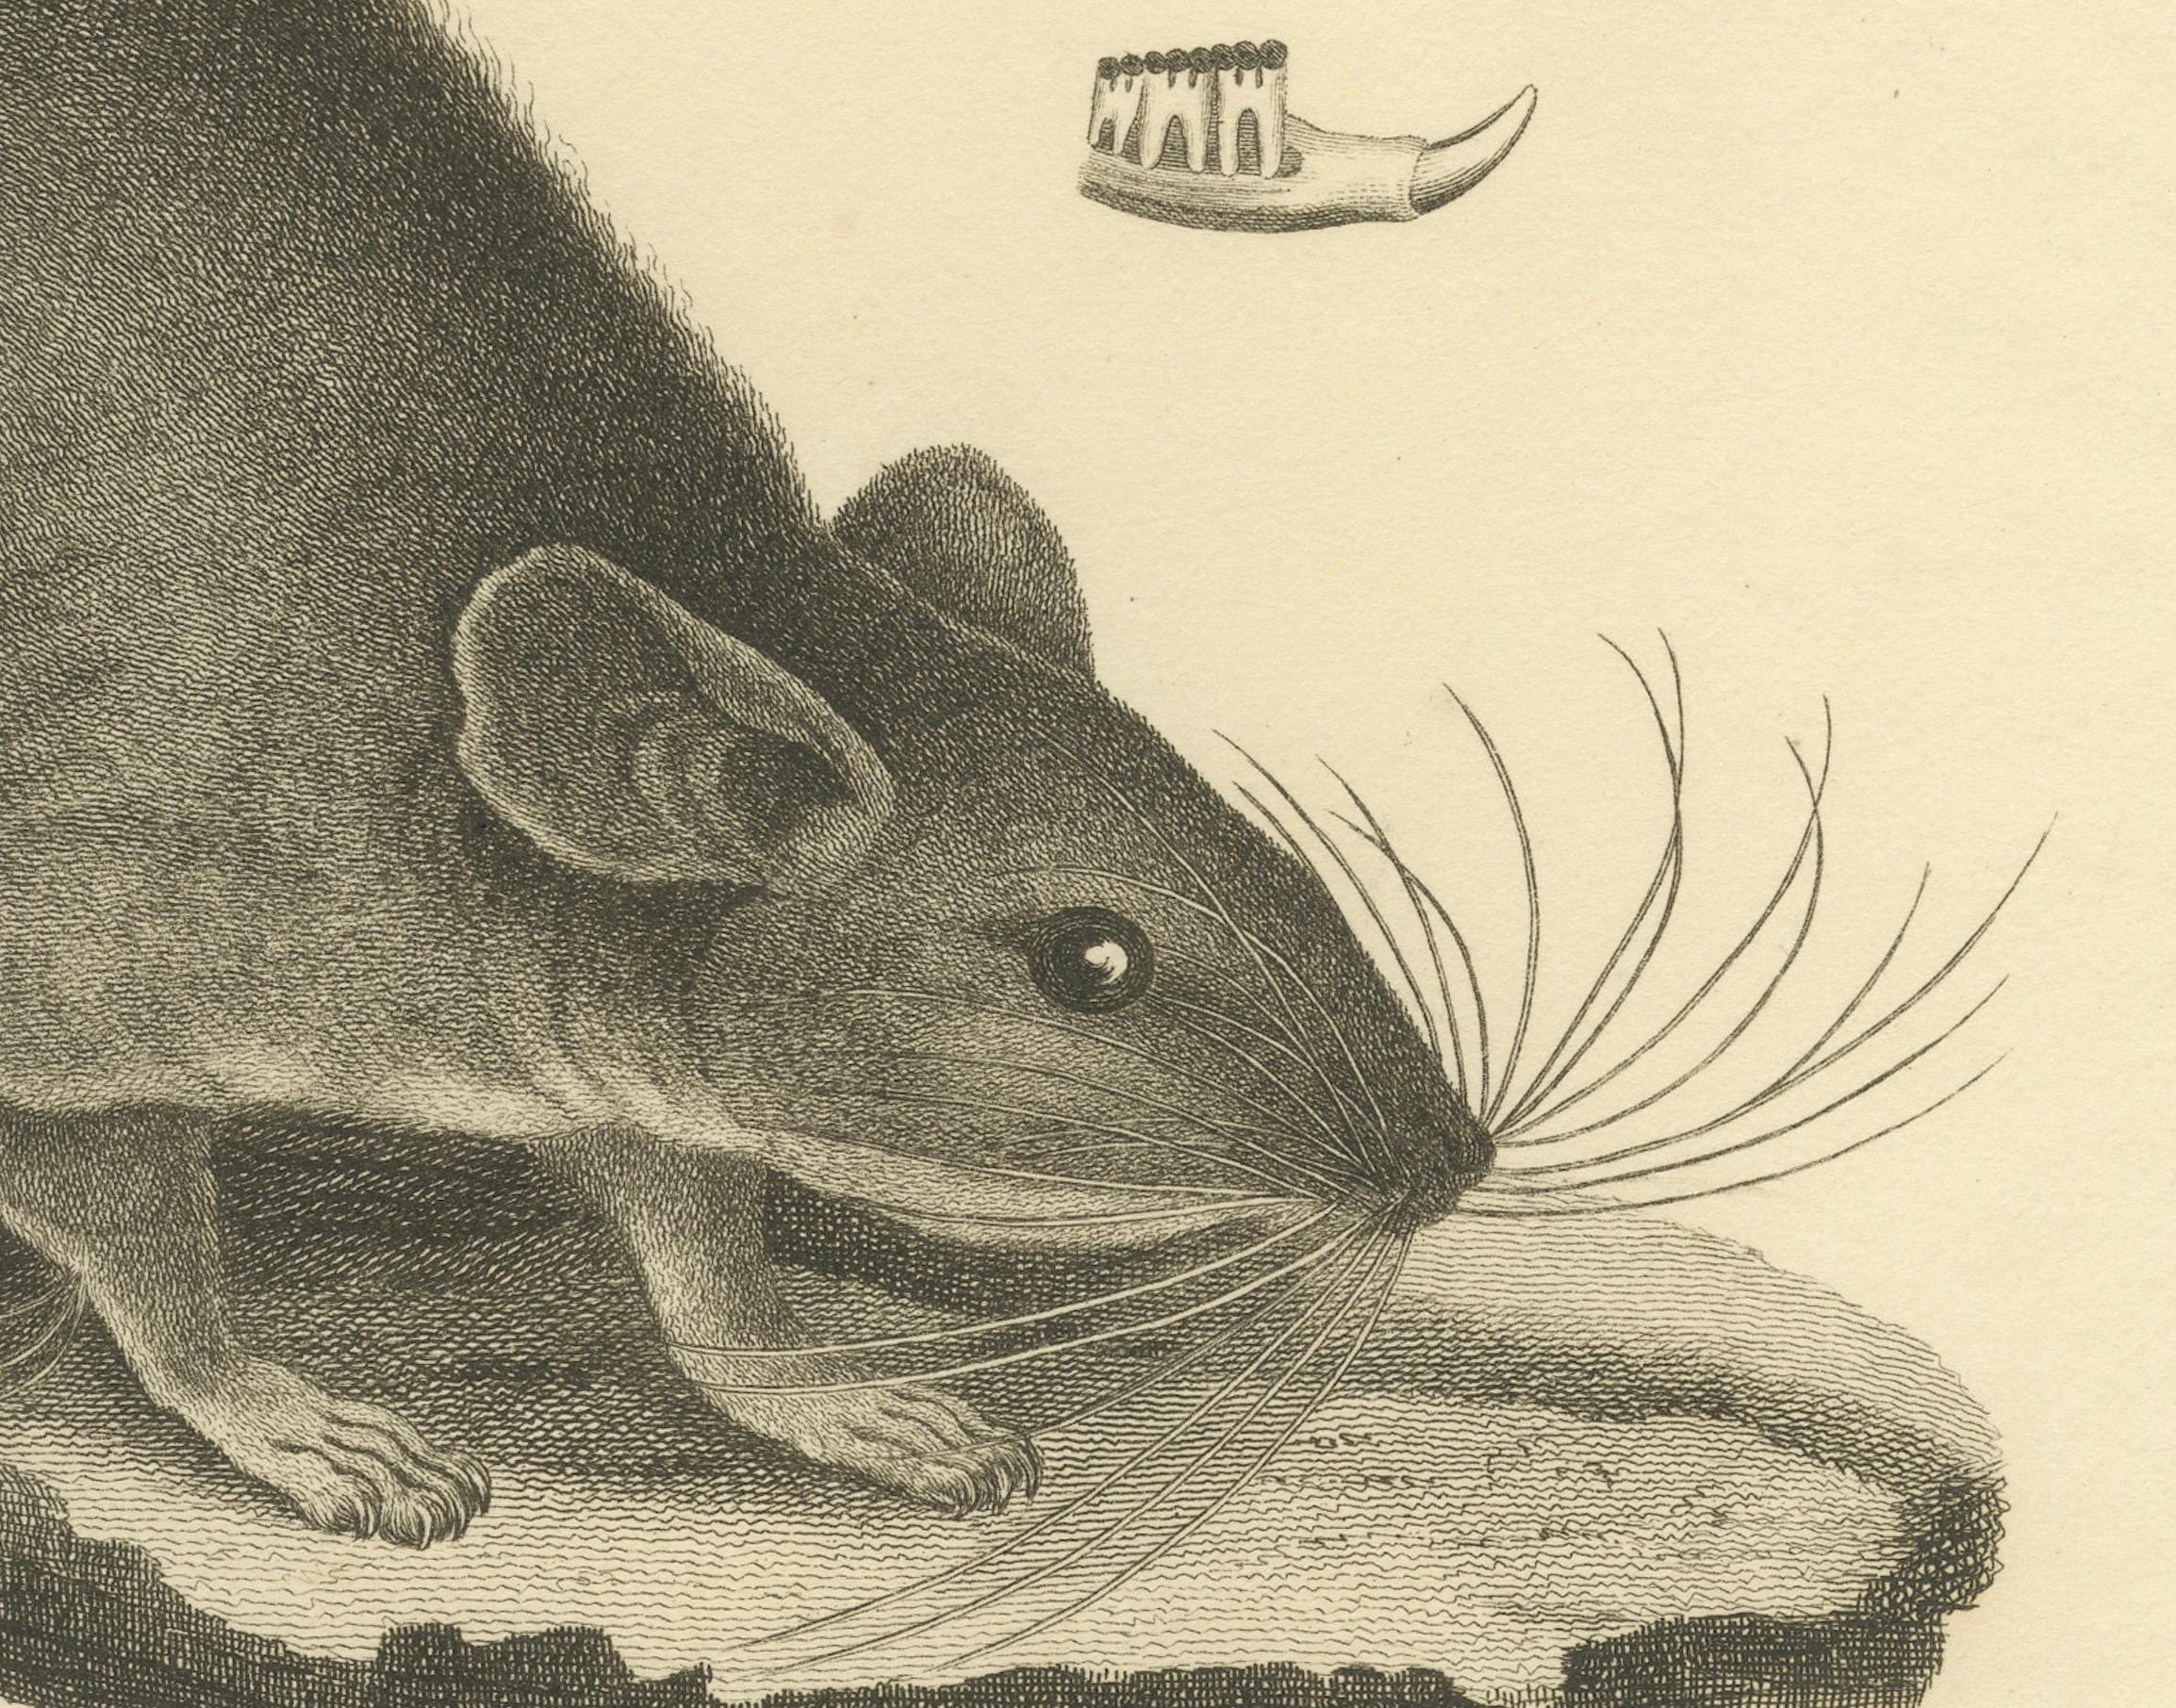 The image depicts an antique print titled 'Florida Rat, Neotoma Floridana', and is an original antique print with hand coloring. Published by G.B. Whittaker based on an illustration by Charles Hamilton Smith around 1827, it would represent another